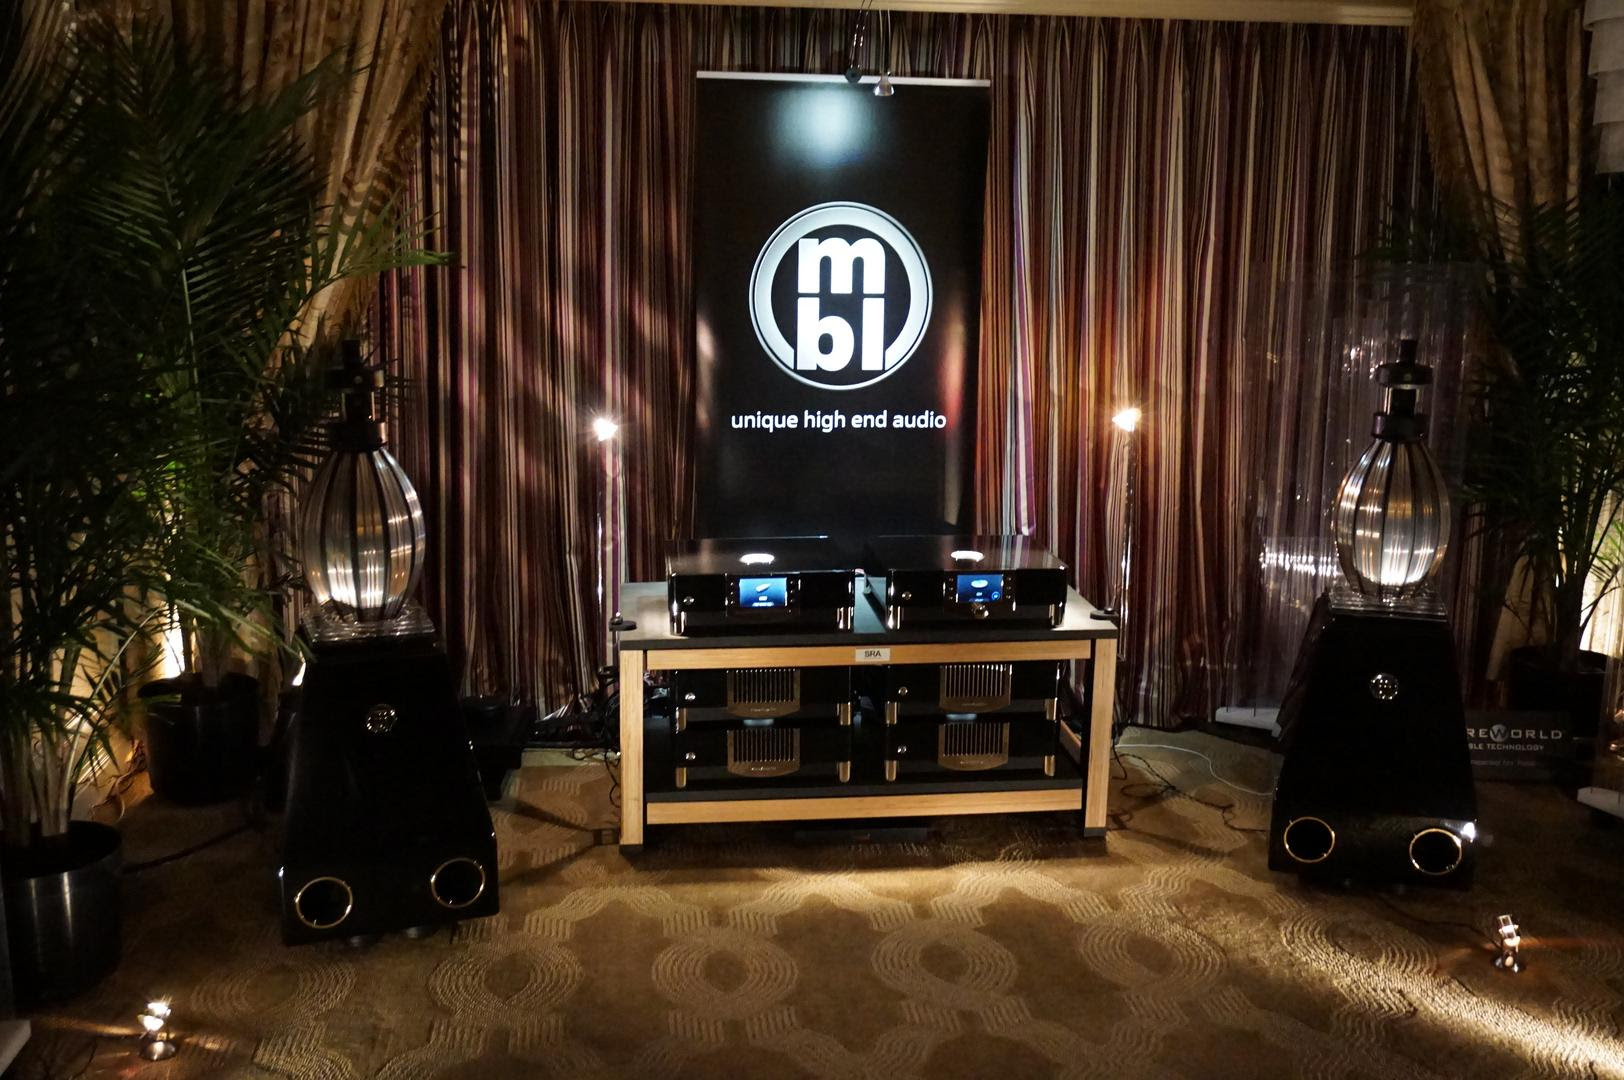 CHRIS MARTENS’ BEST OF CES 2017: TRADITIONAL TWO-CHANNEL AUDIO